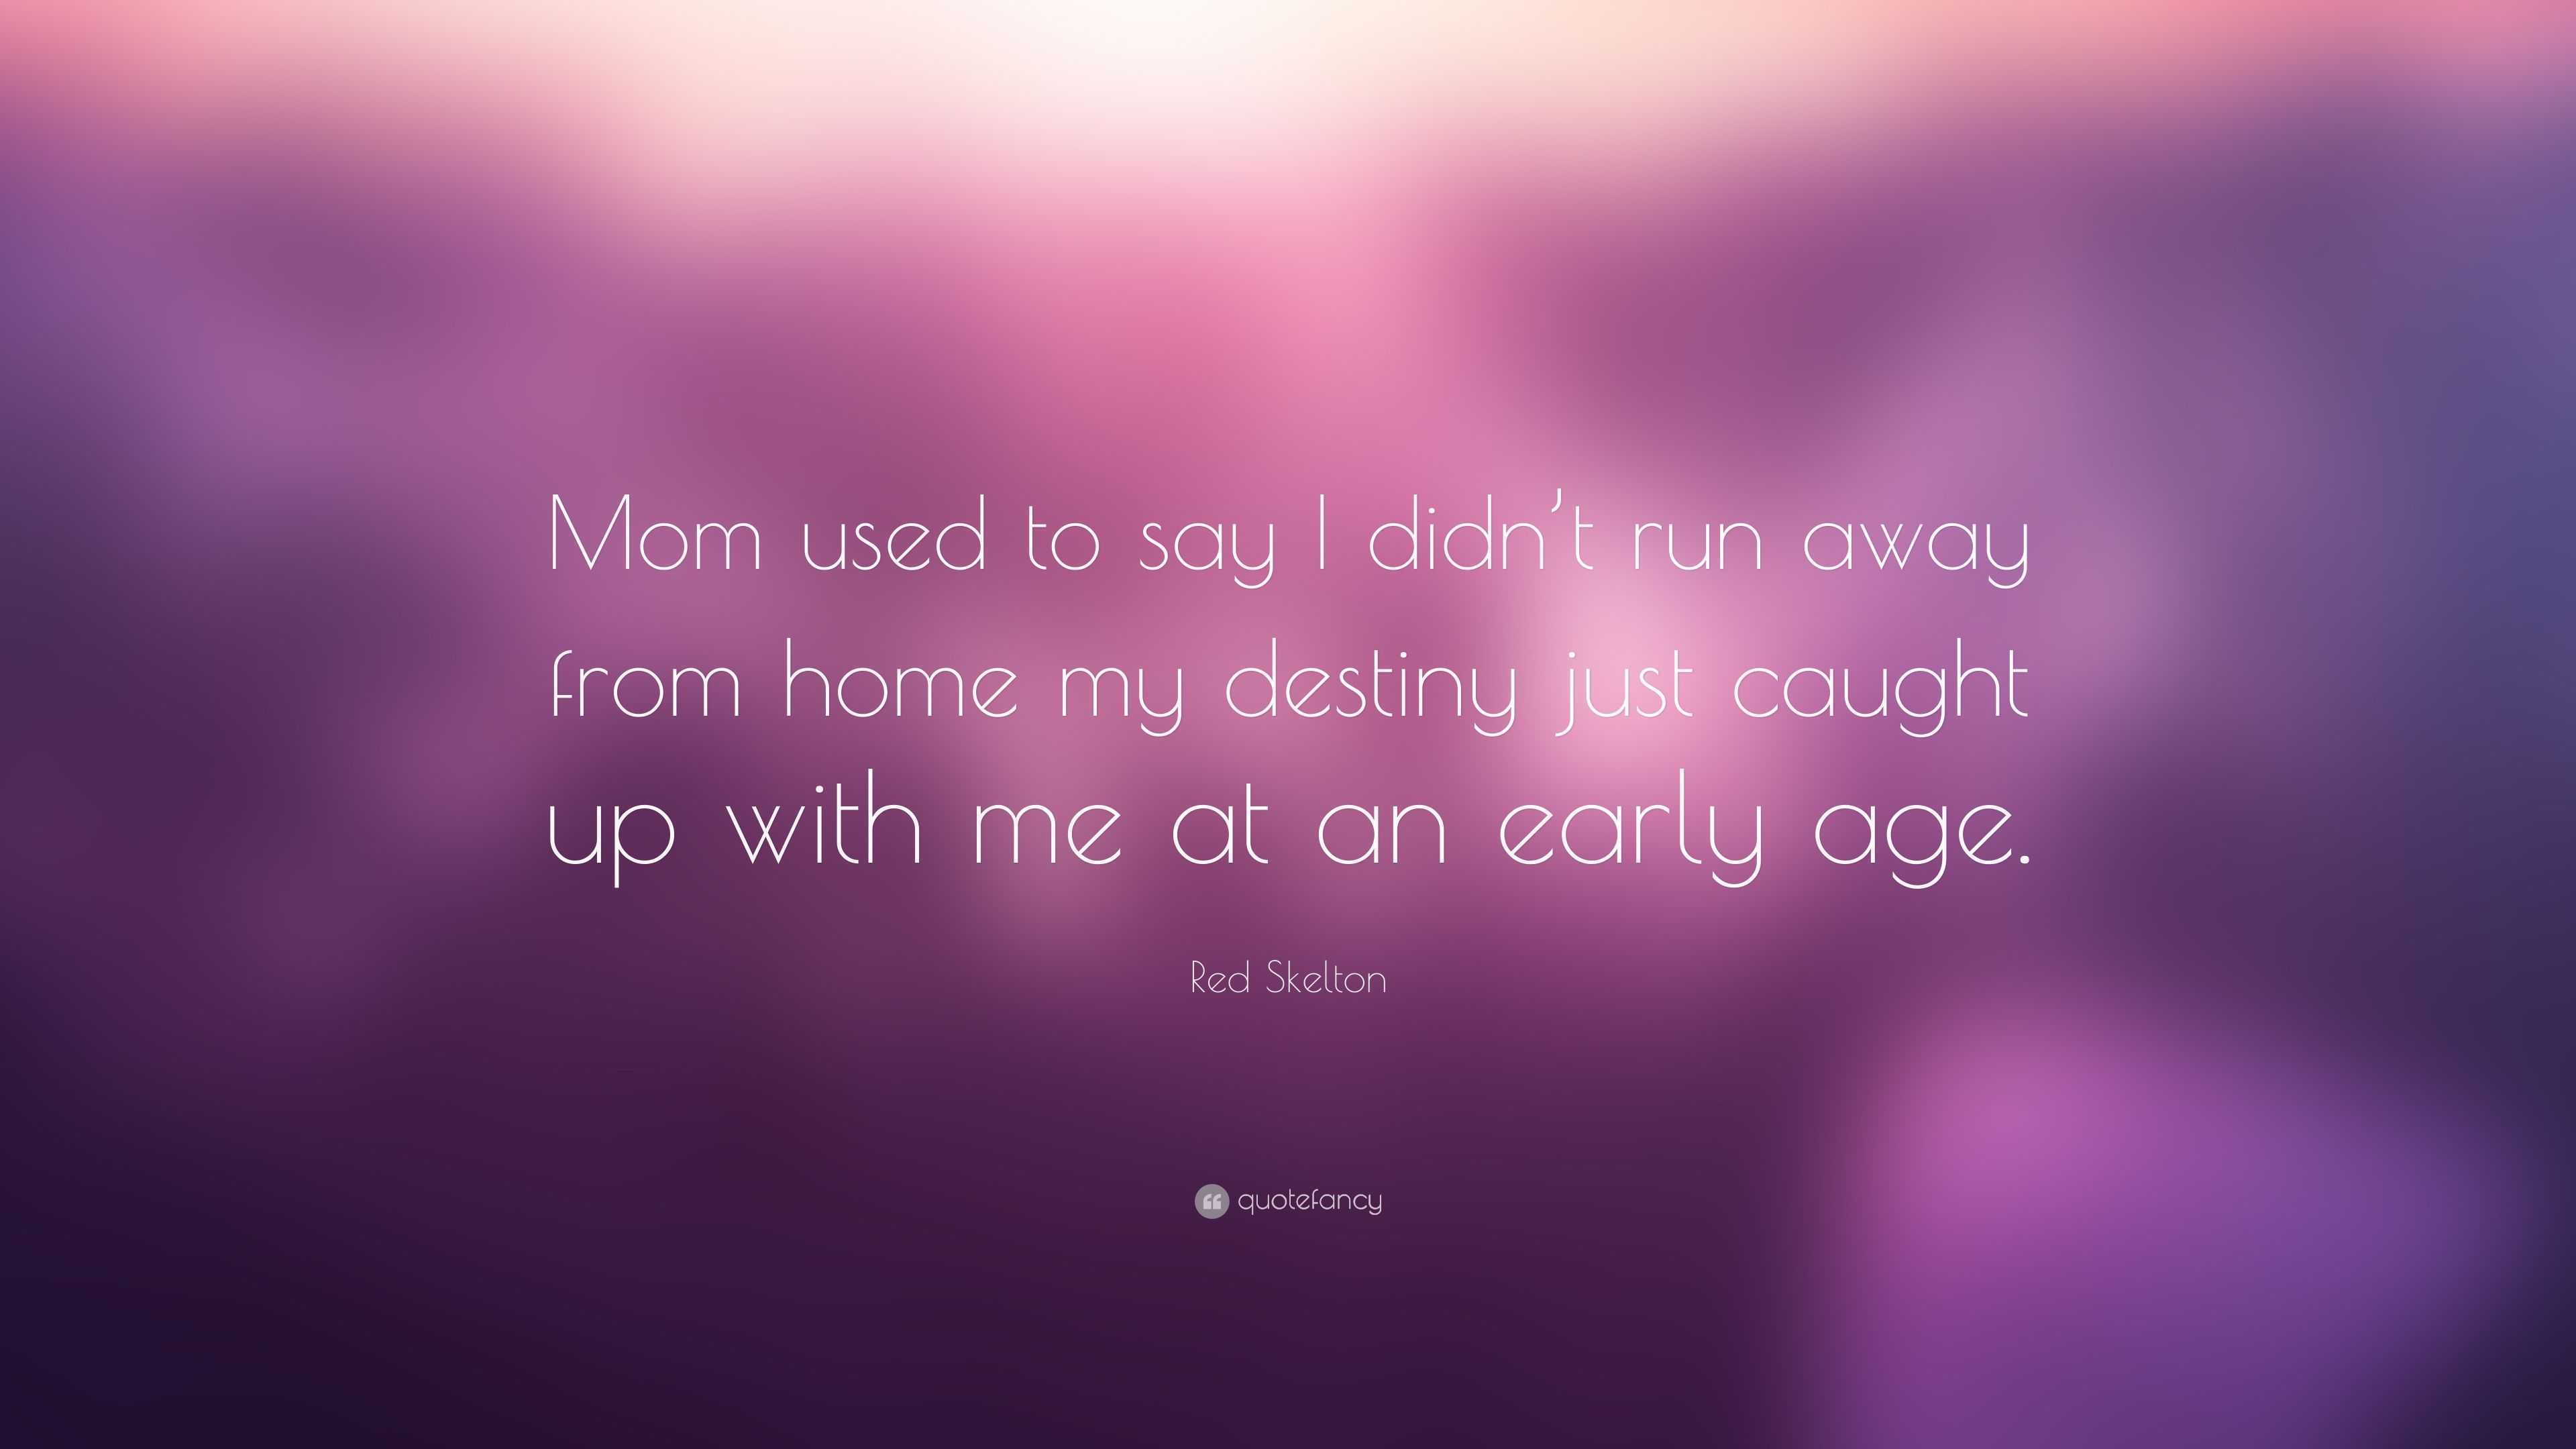 https://quotefancy.com/media/wallpaper/3840x2160/3365860-Red-Skelton-Quote-Mom-used-to-say-I-didn-t-run-away-from-home-my.jpg